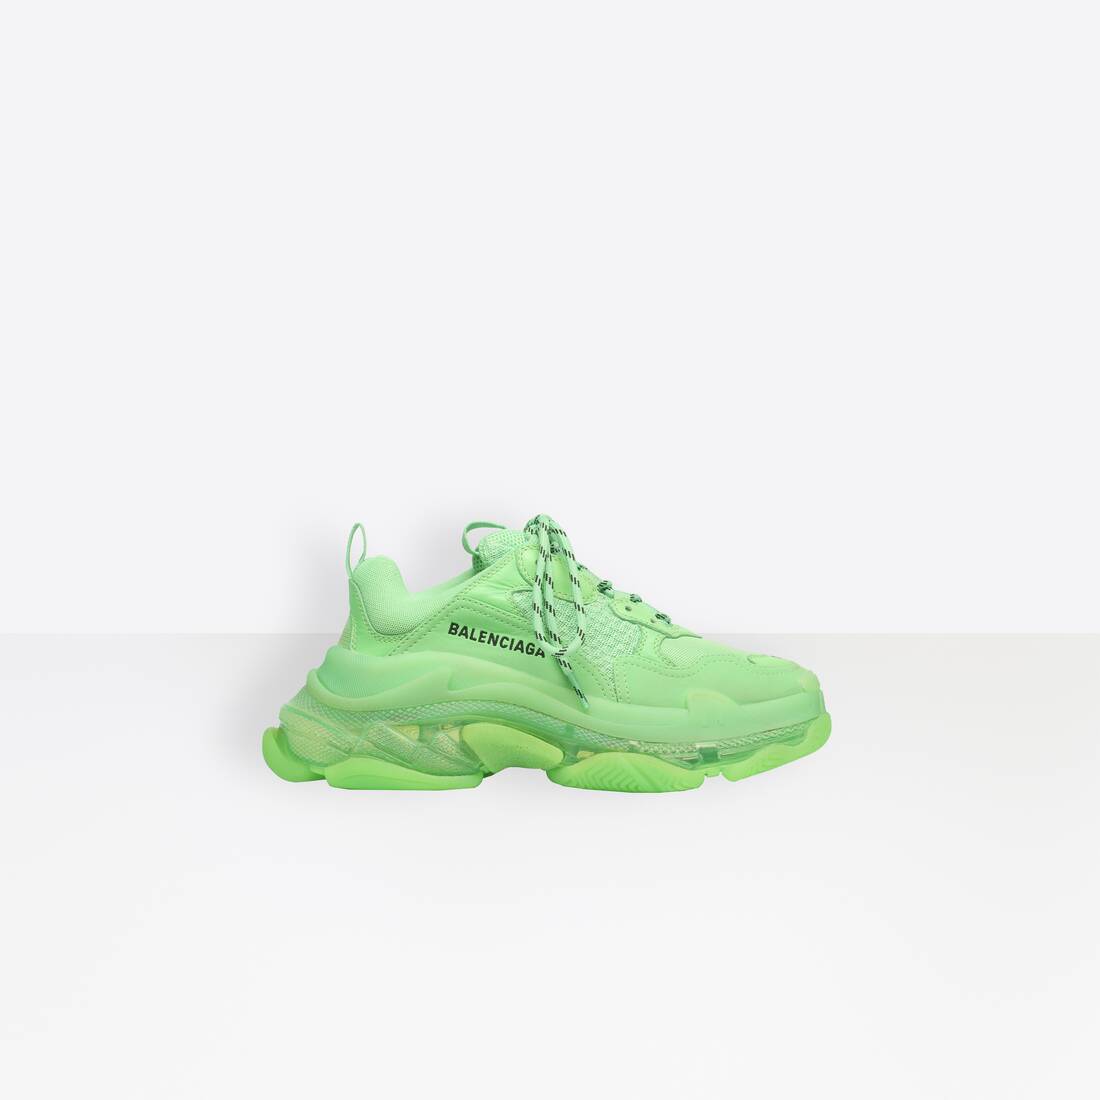 green balenciaga triple s for Sale,Up To OFF 65%